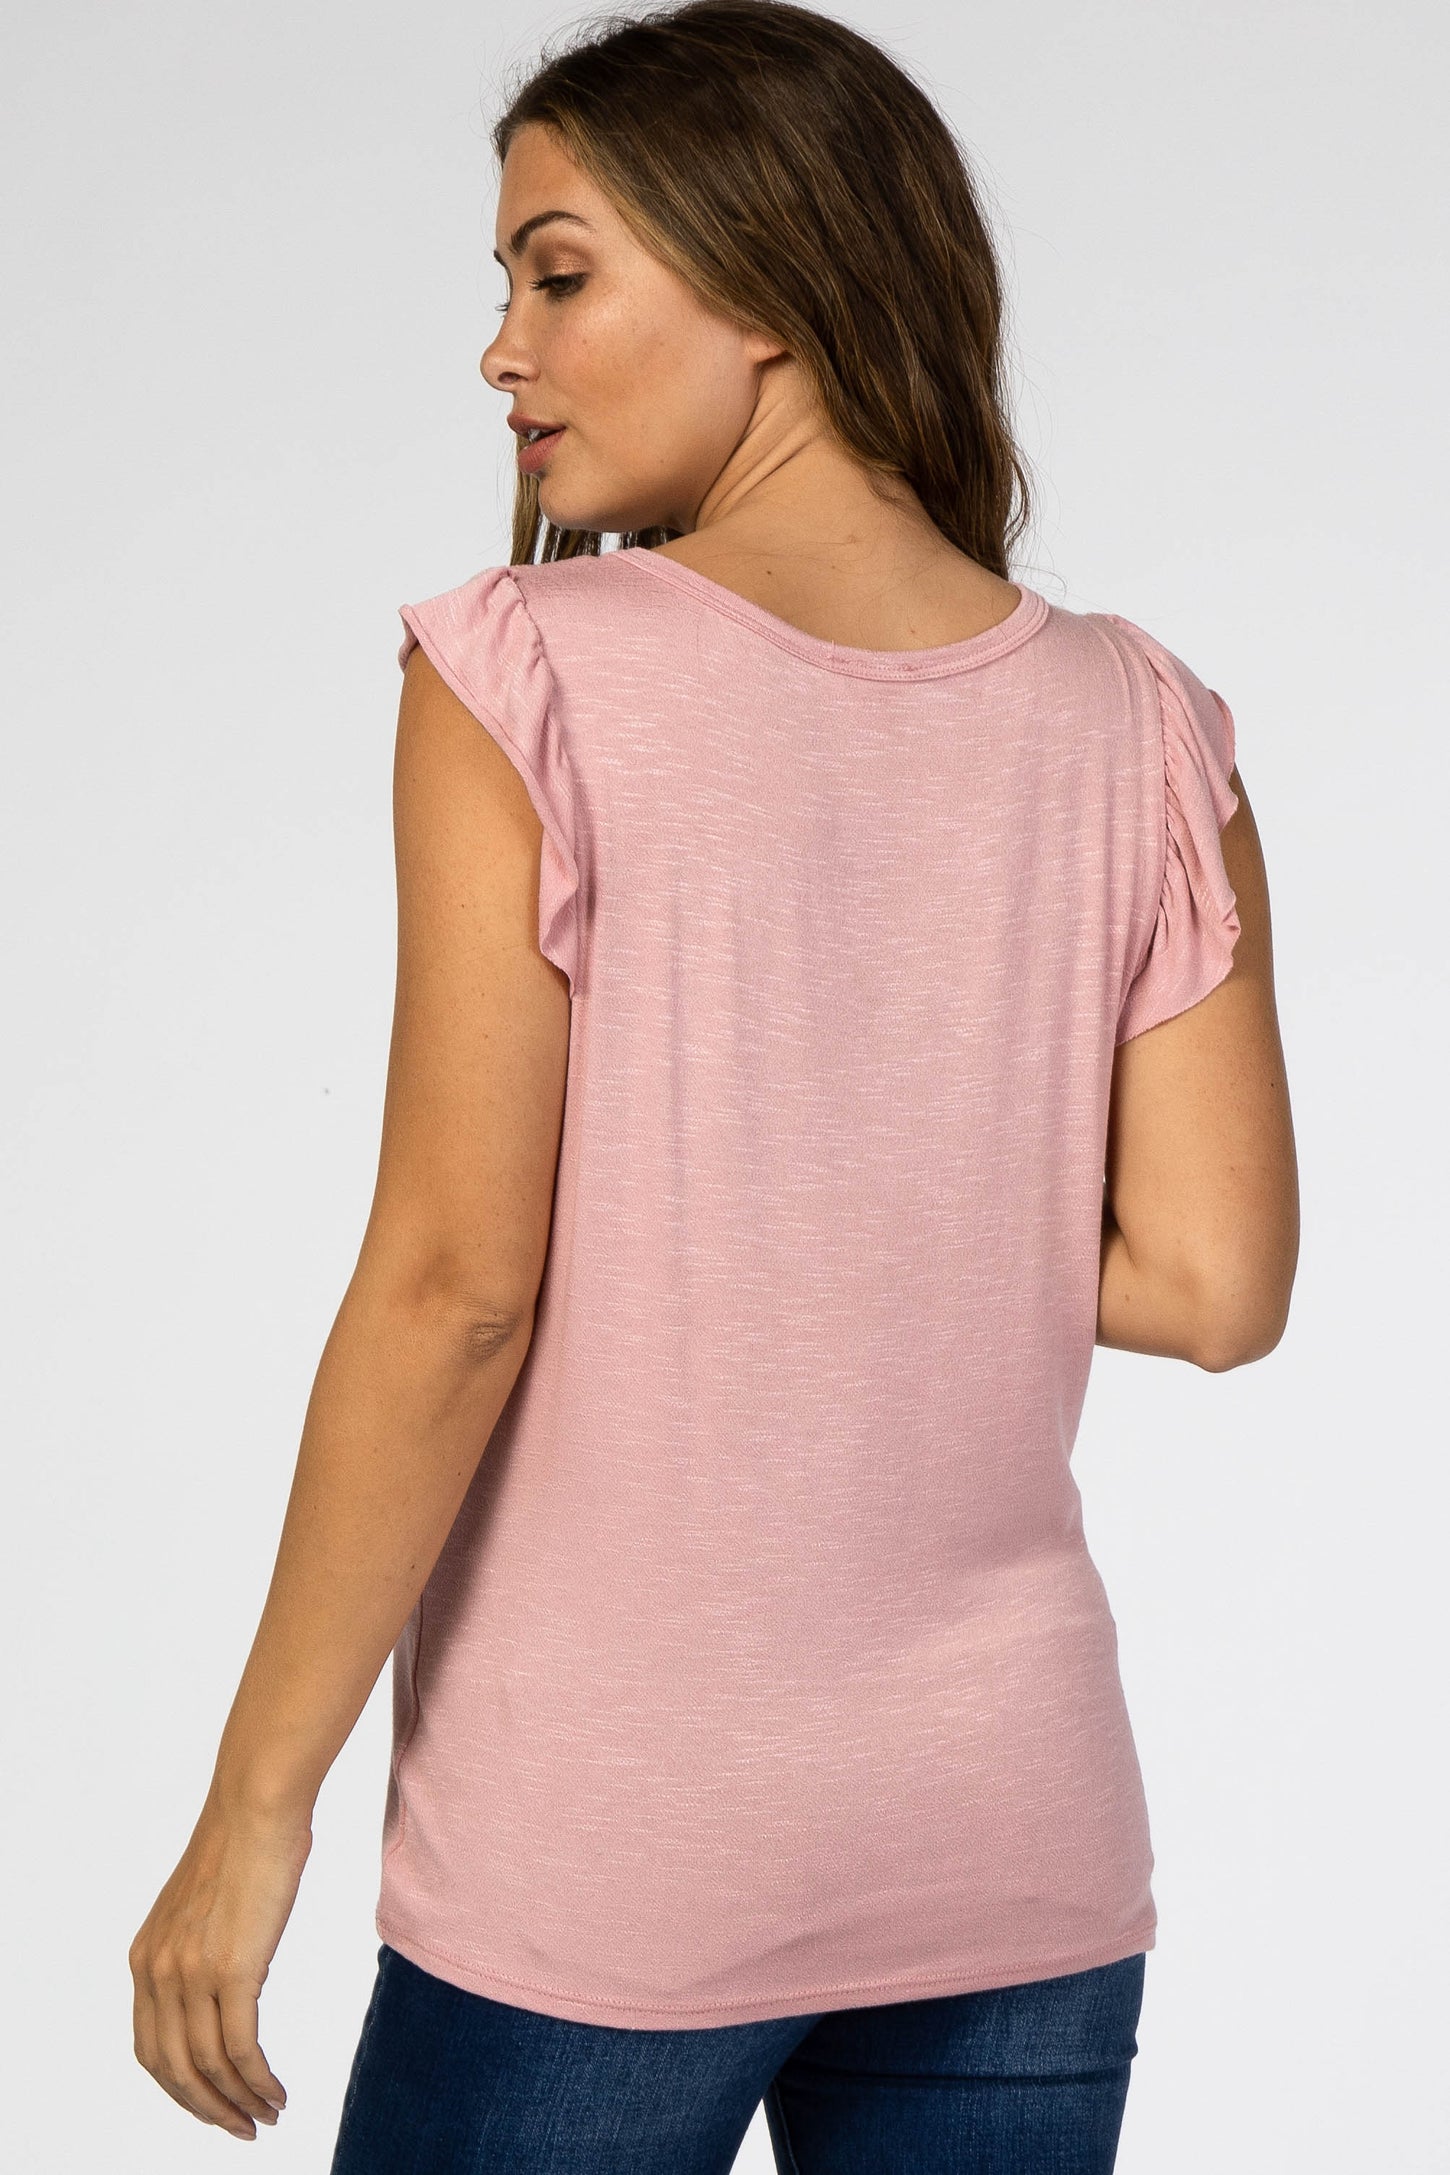 Pink Lace Inset Ruffle Accent Maternity Top